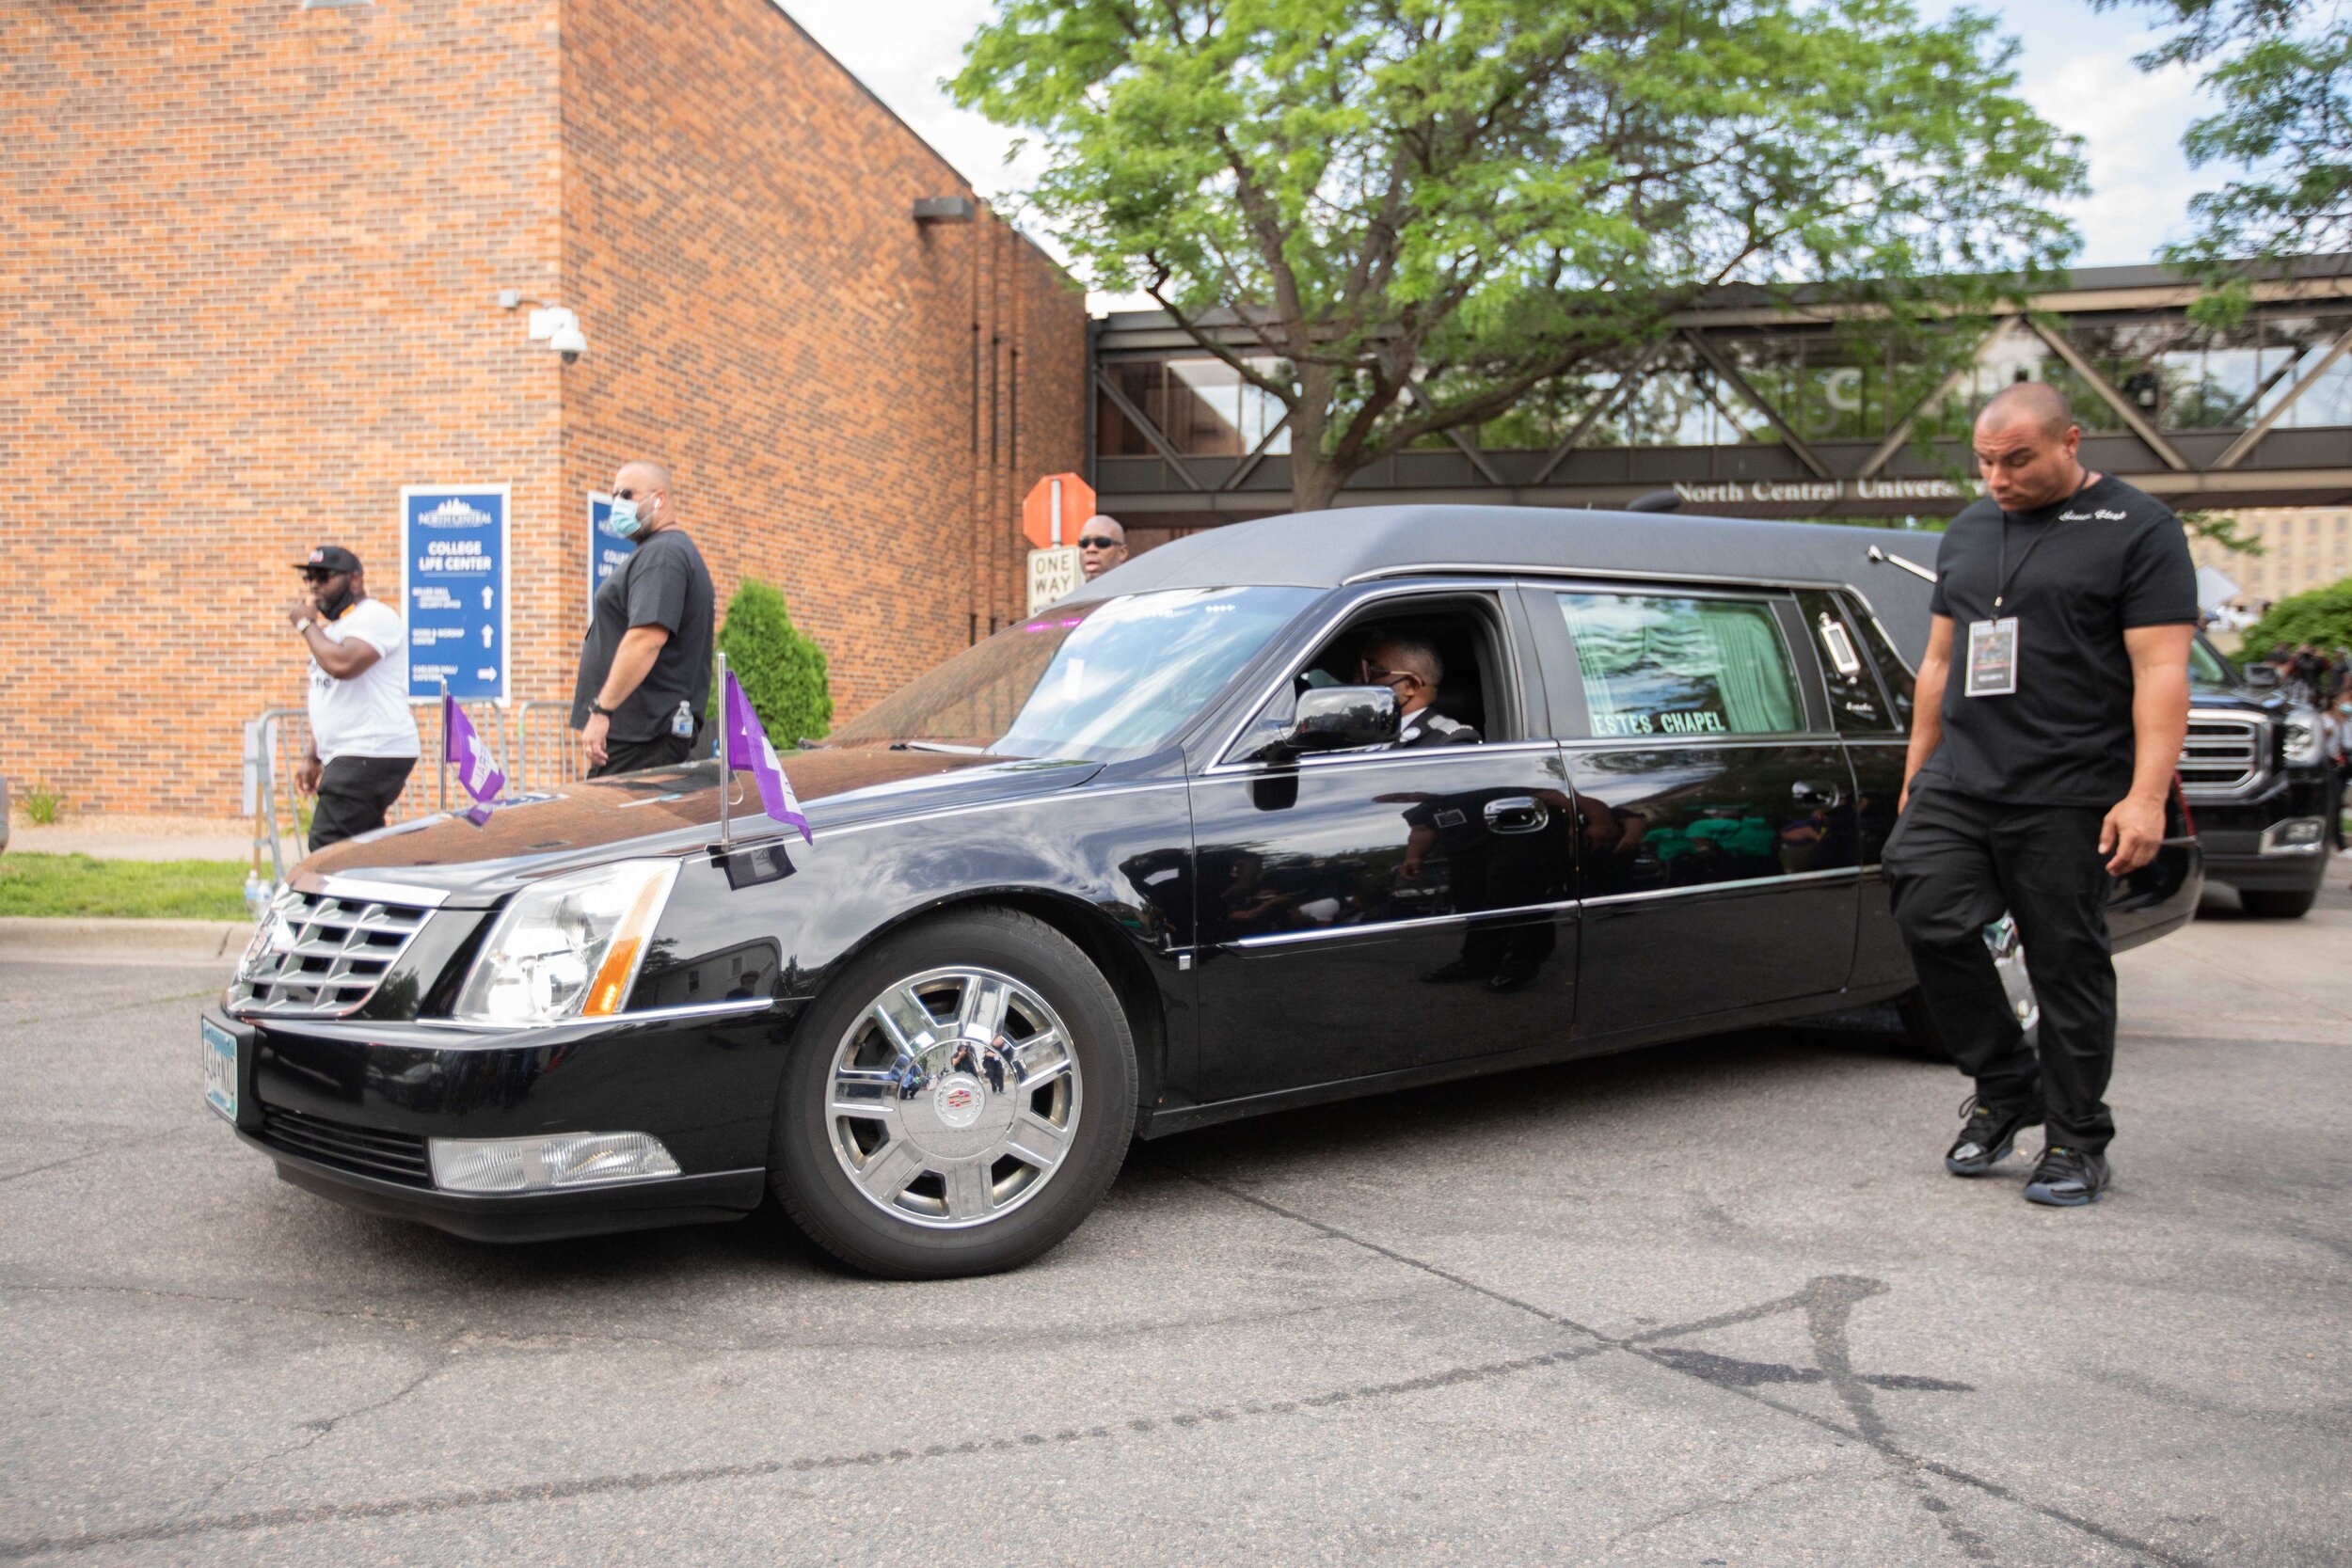  After having the casket put into the back of a hearse, it moves to the street where it leaves the grounds of North Central University in Minneapolis, Minnesota on Jun 4, 2020. 